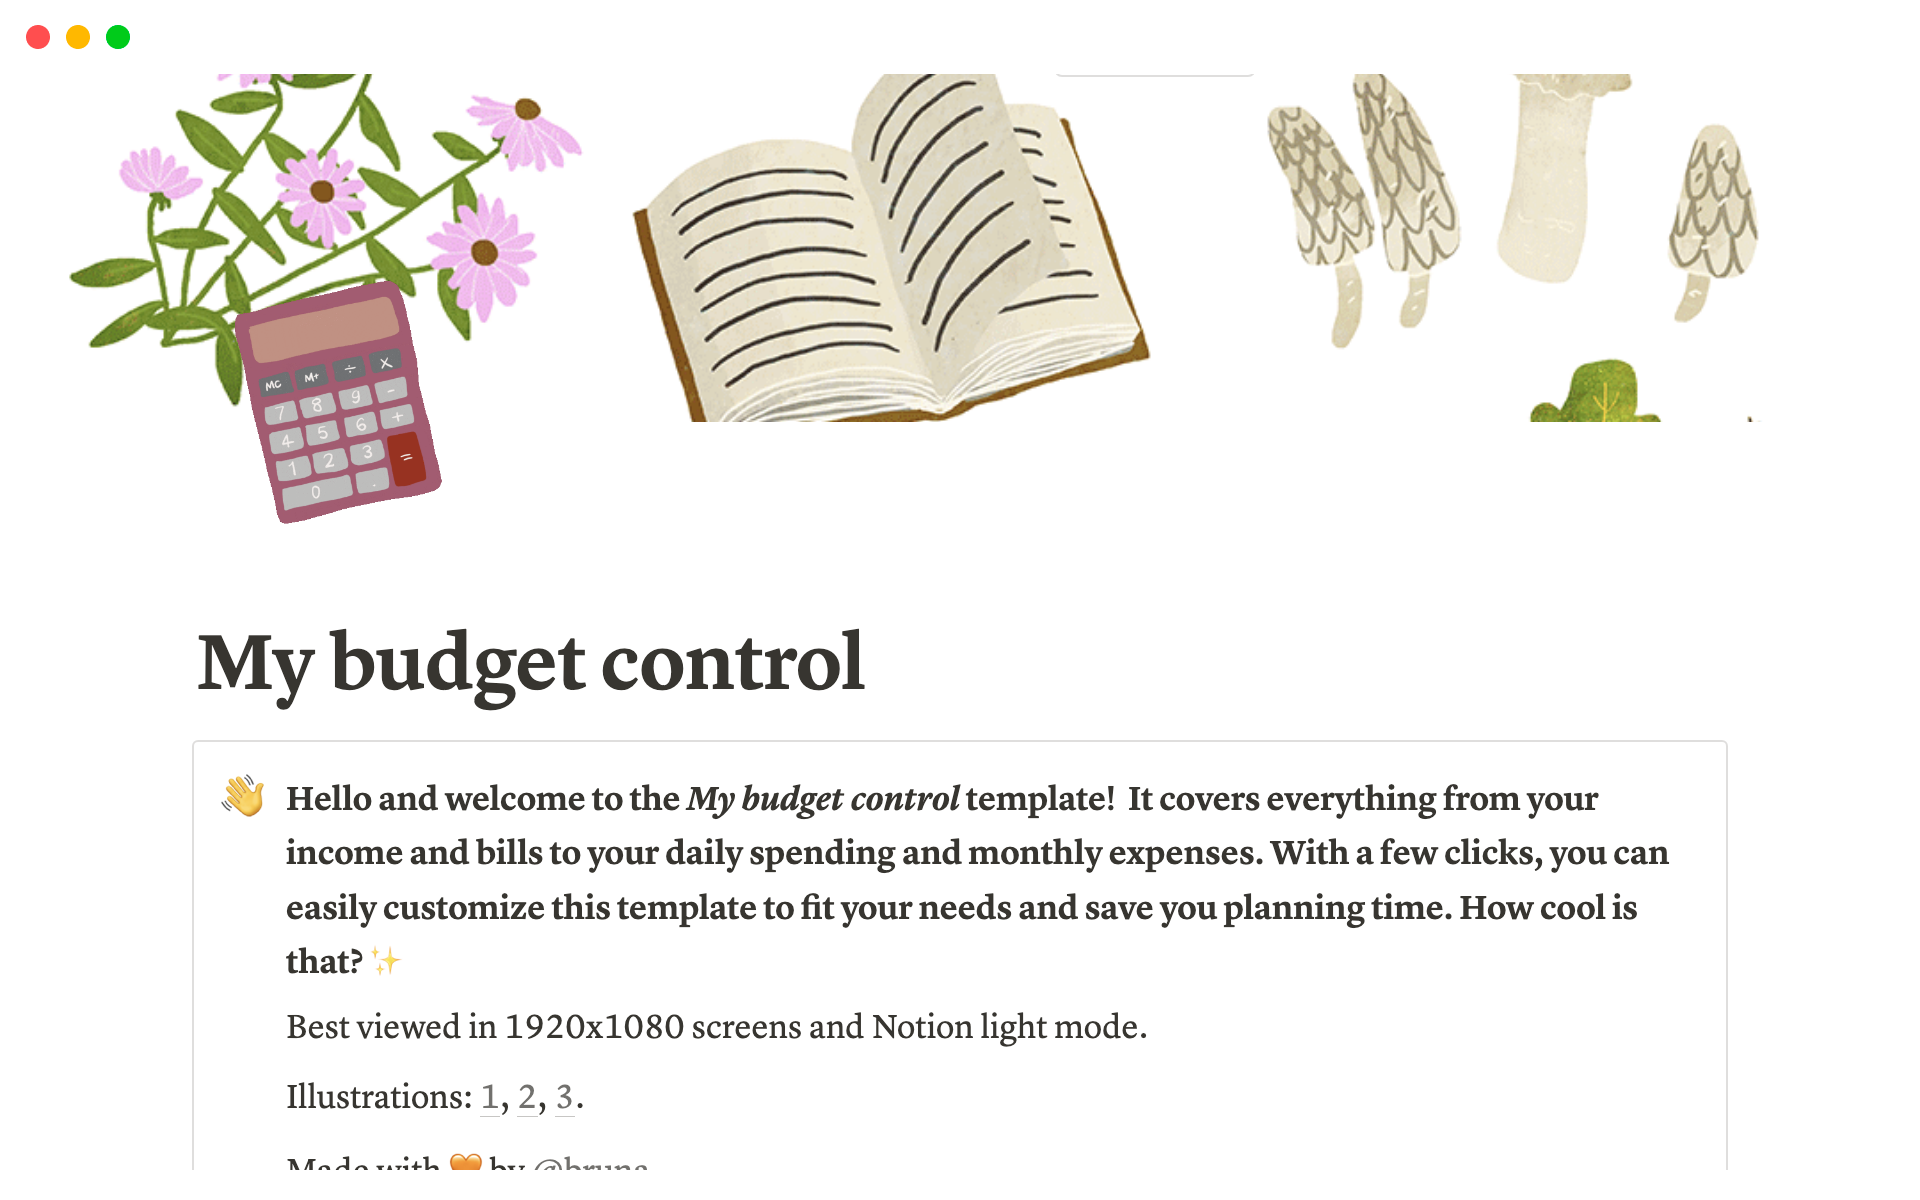 Helps anyone keep up with their budget with a few simple clicks!